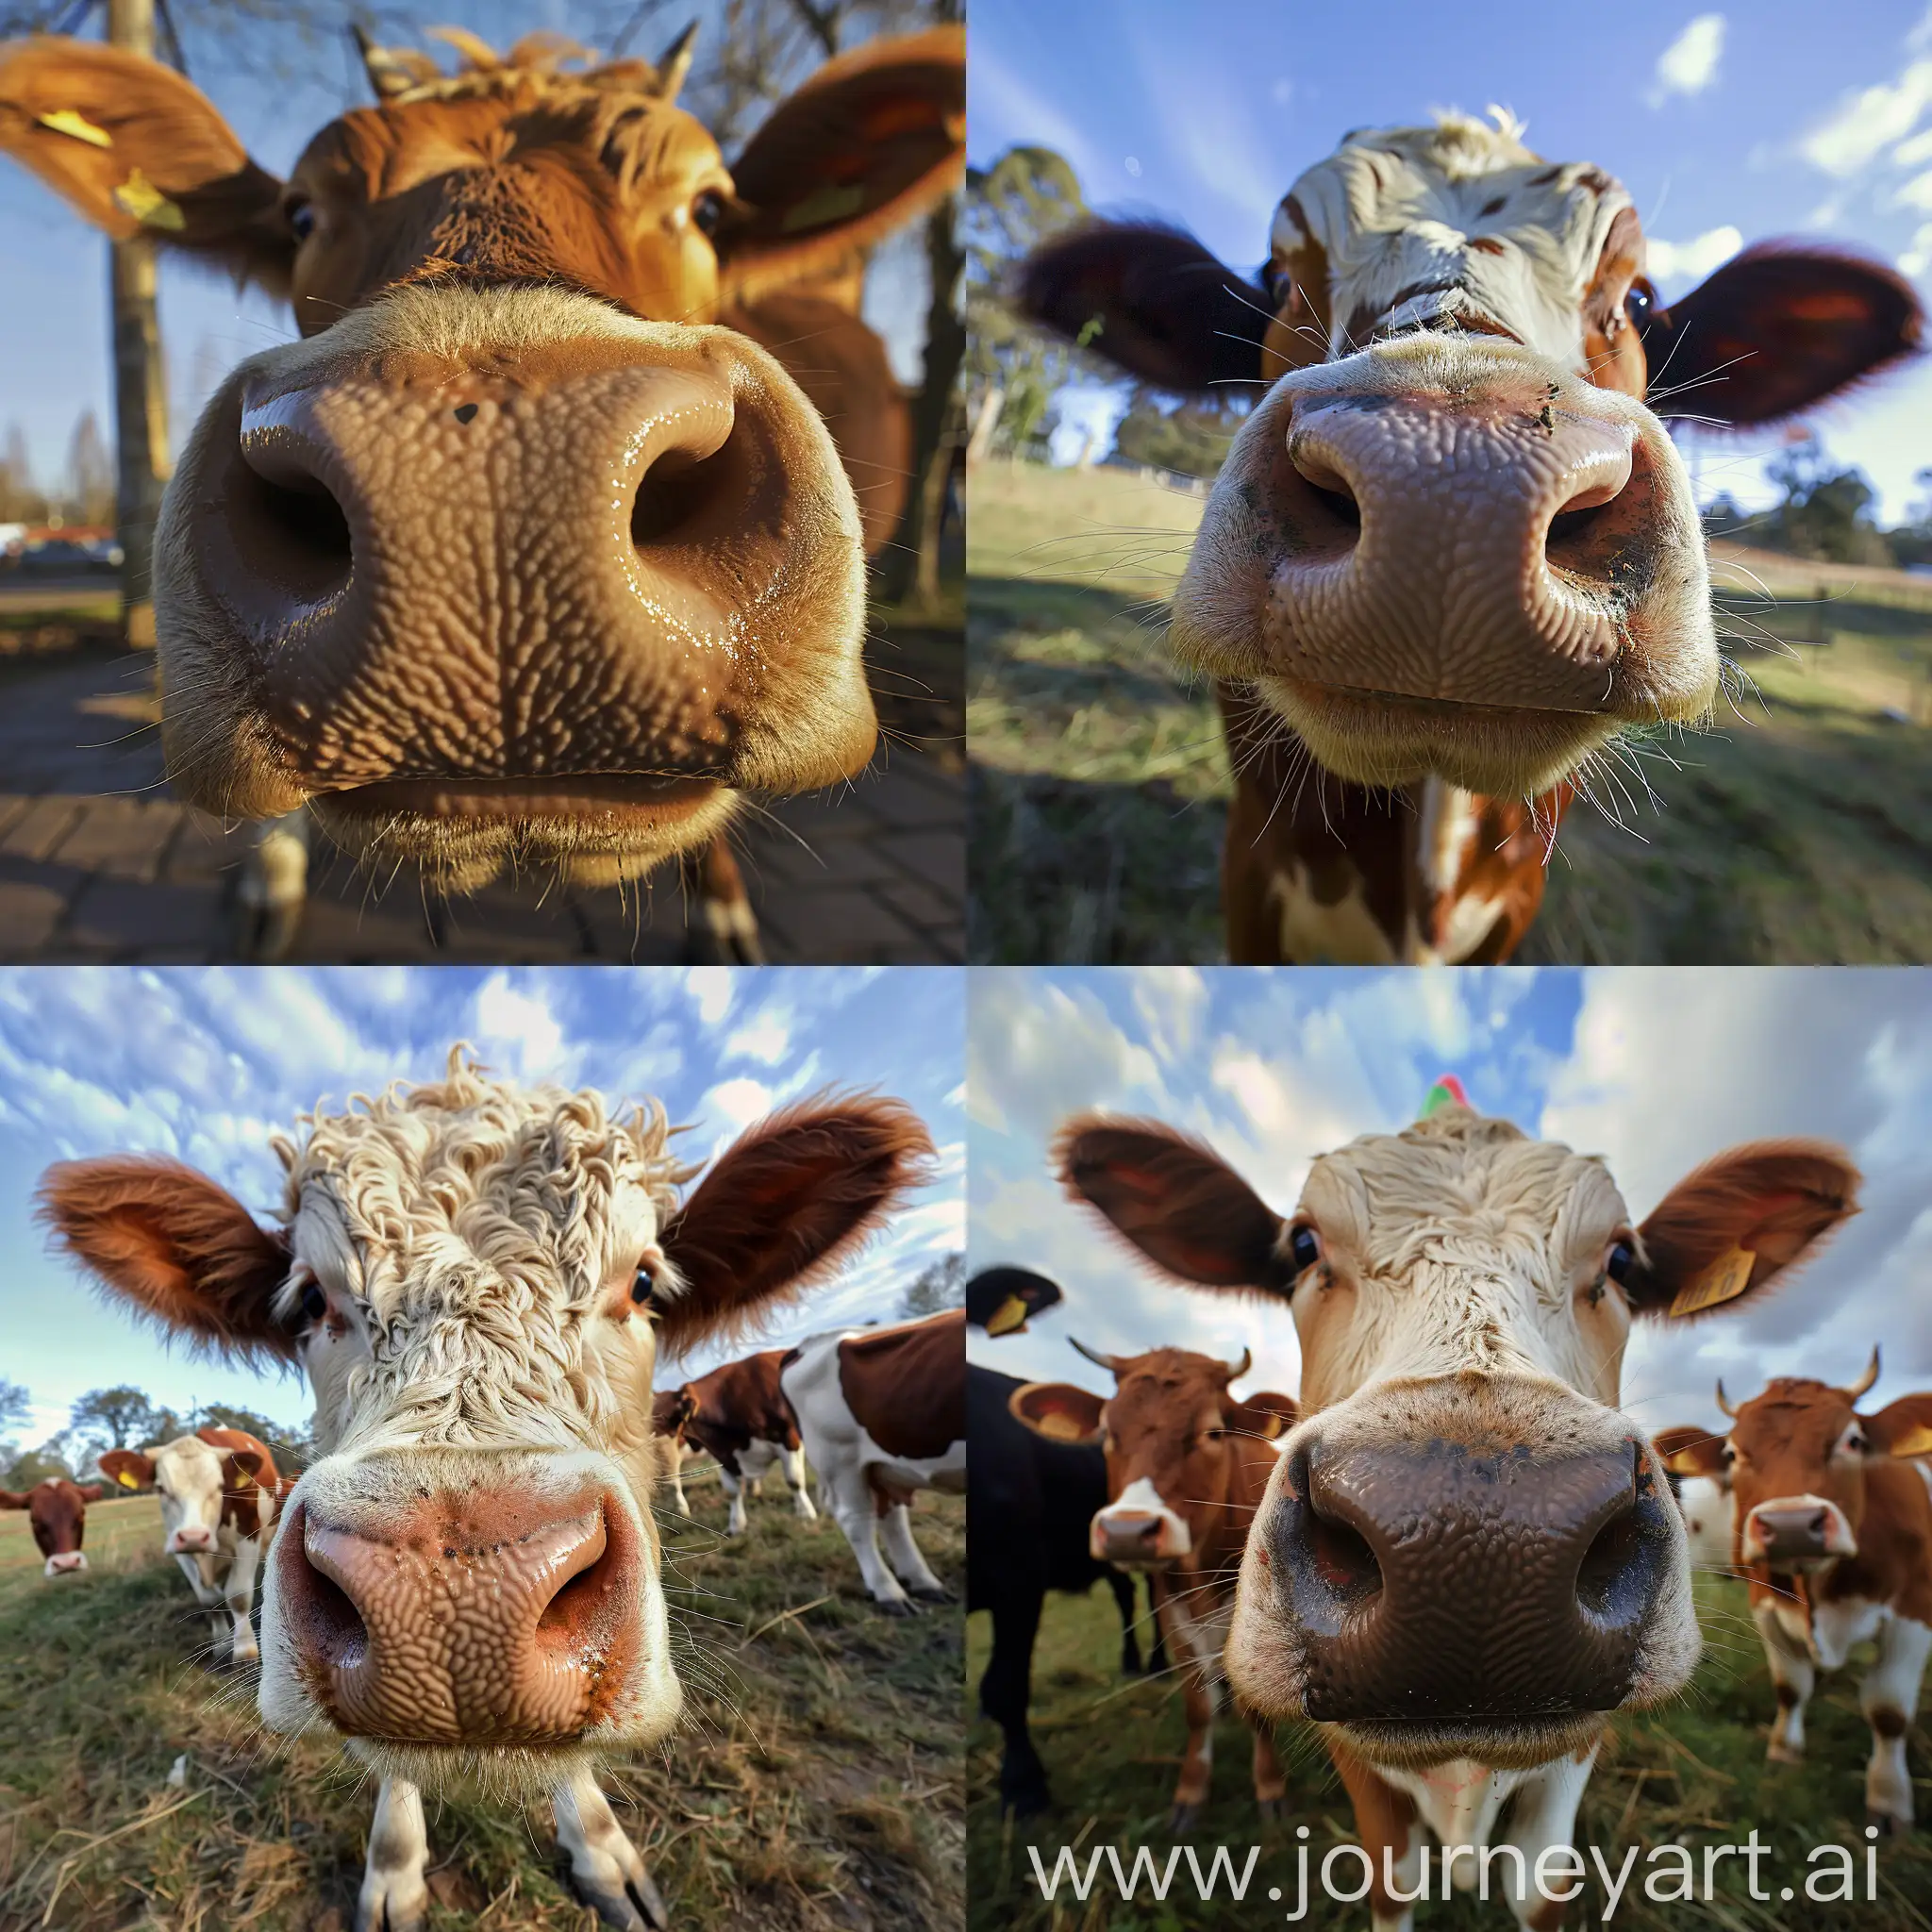 A clown cow smiling. Wide-angle. 